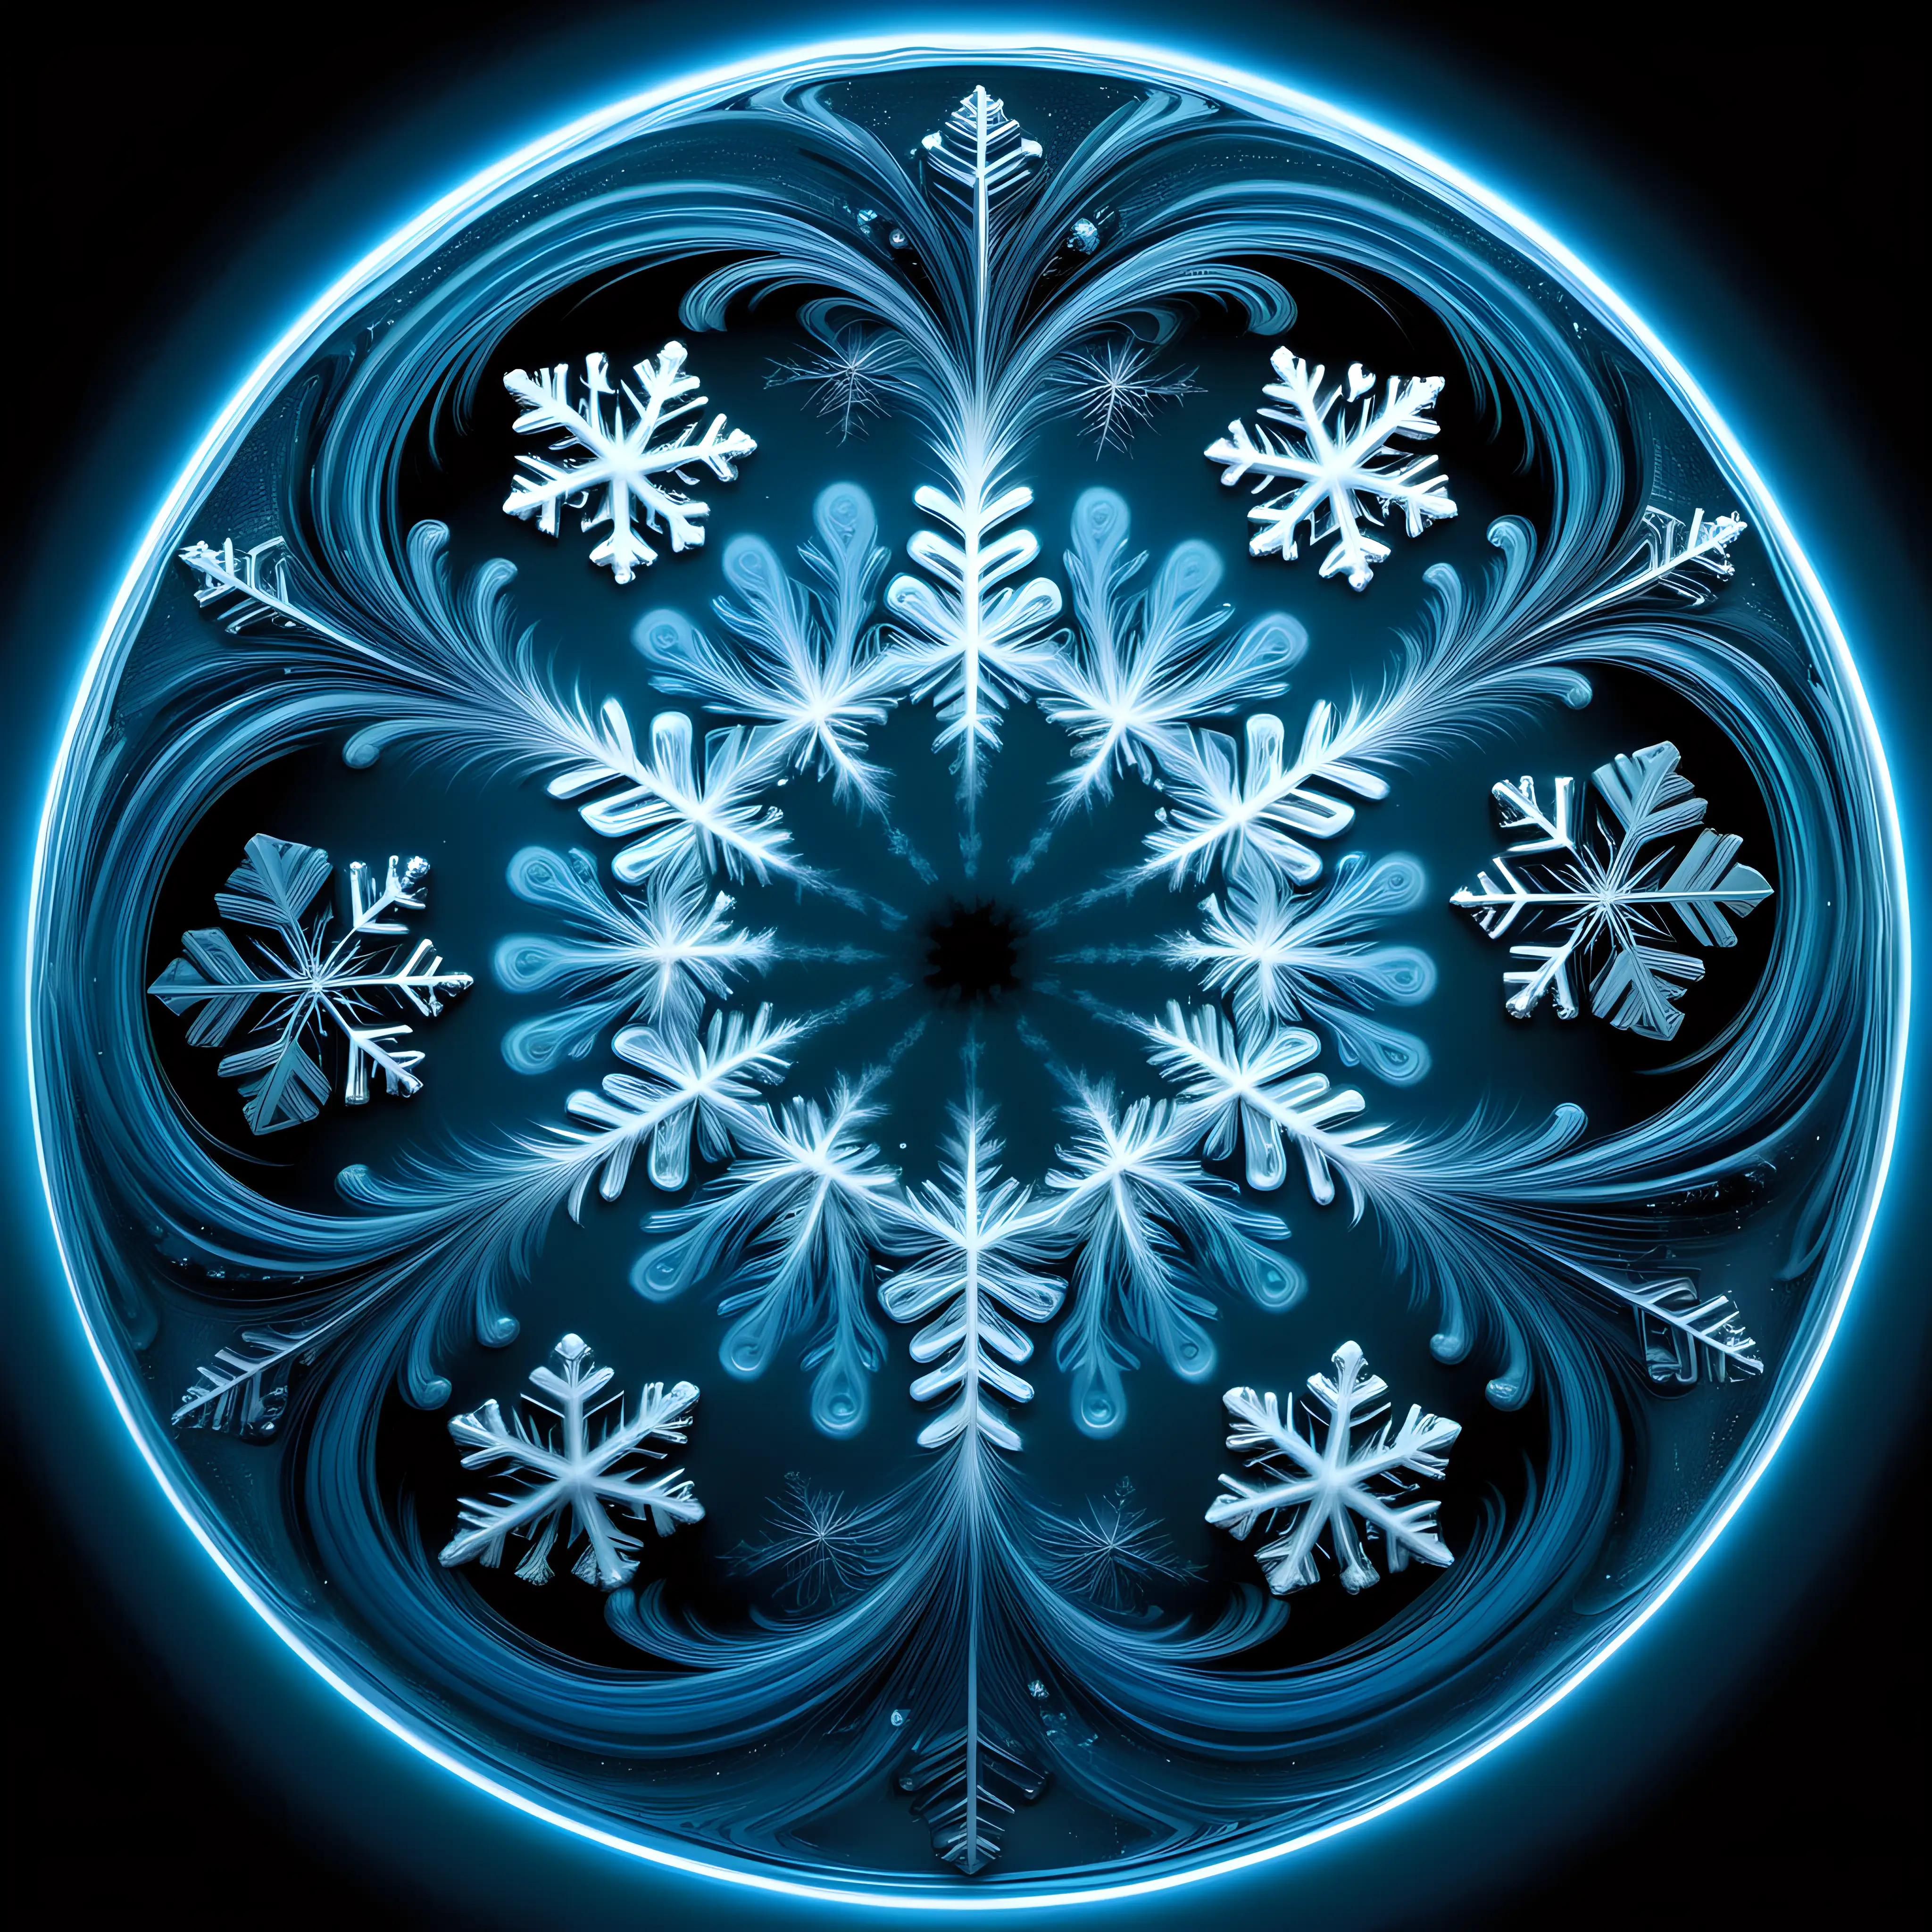 Glowing, celeste blue frosty, circular swirl with snowflakes intermixed within it